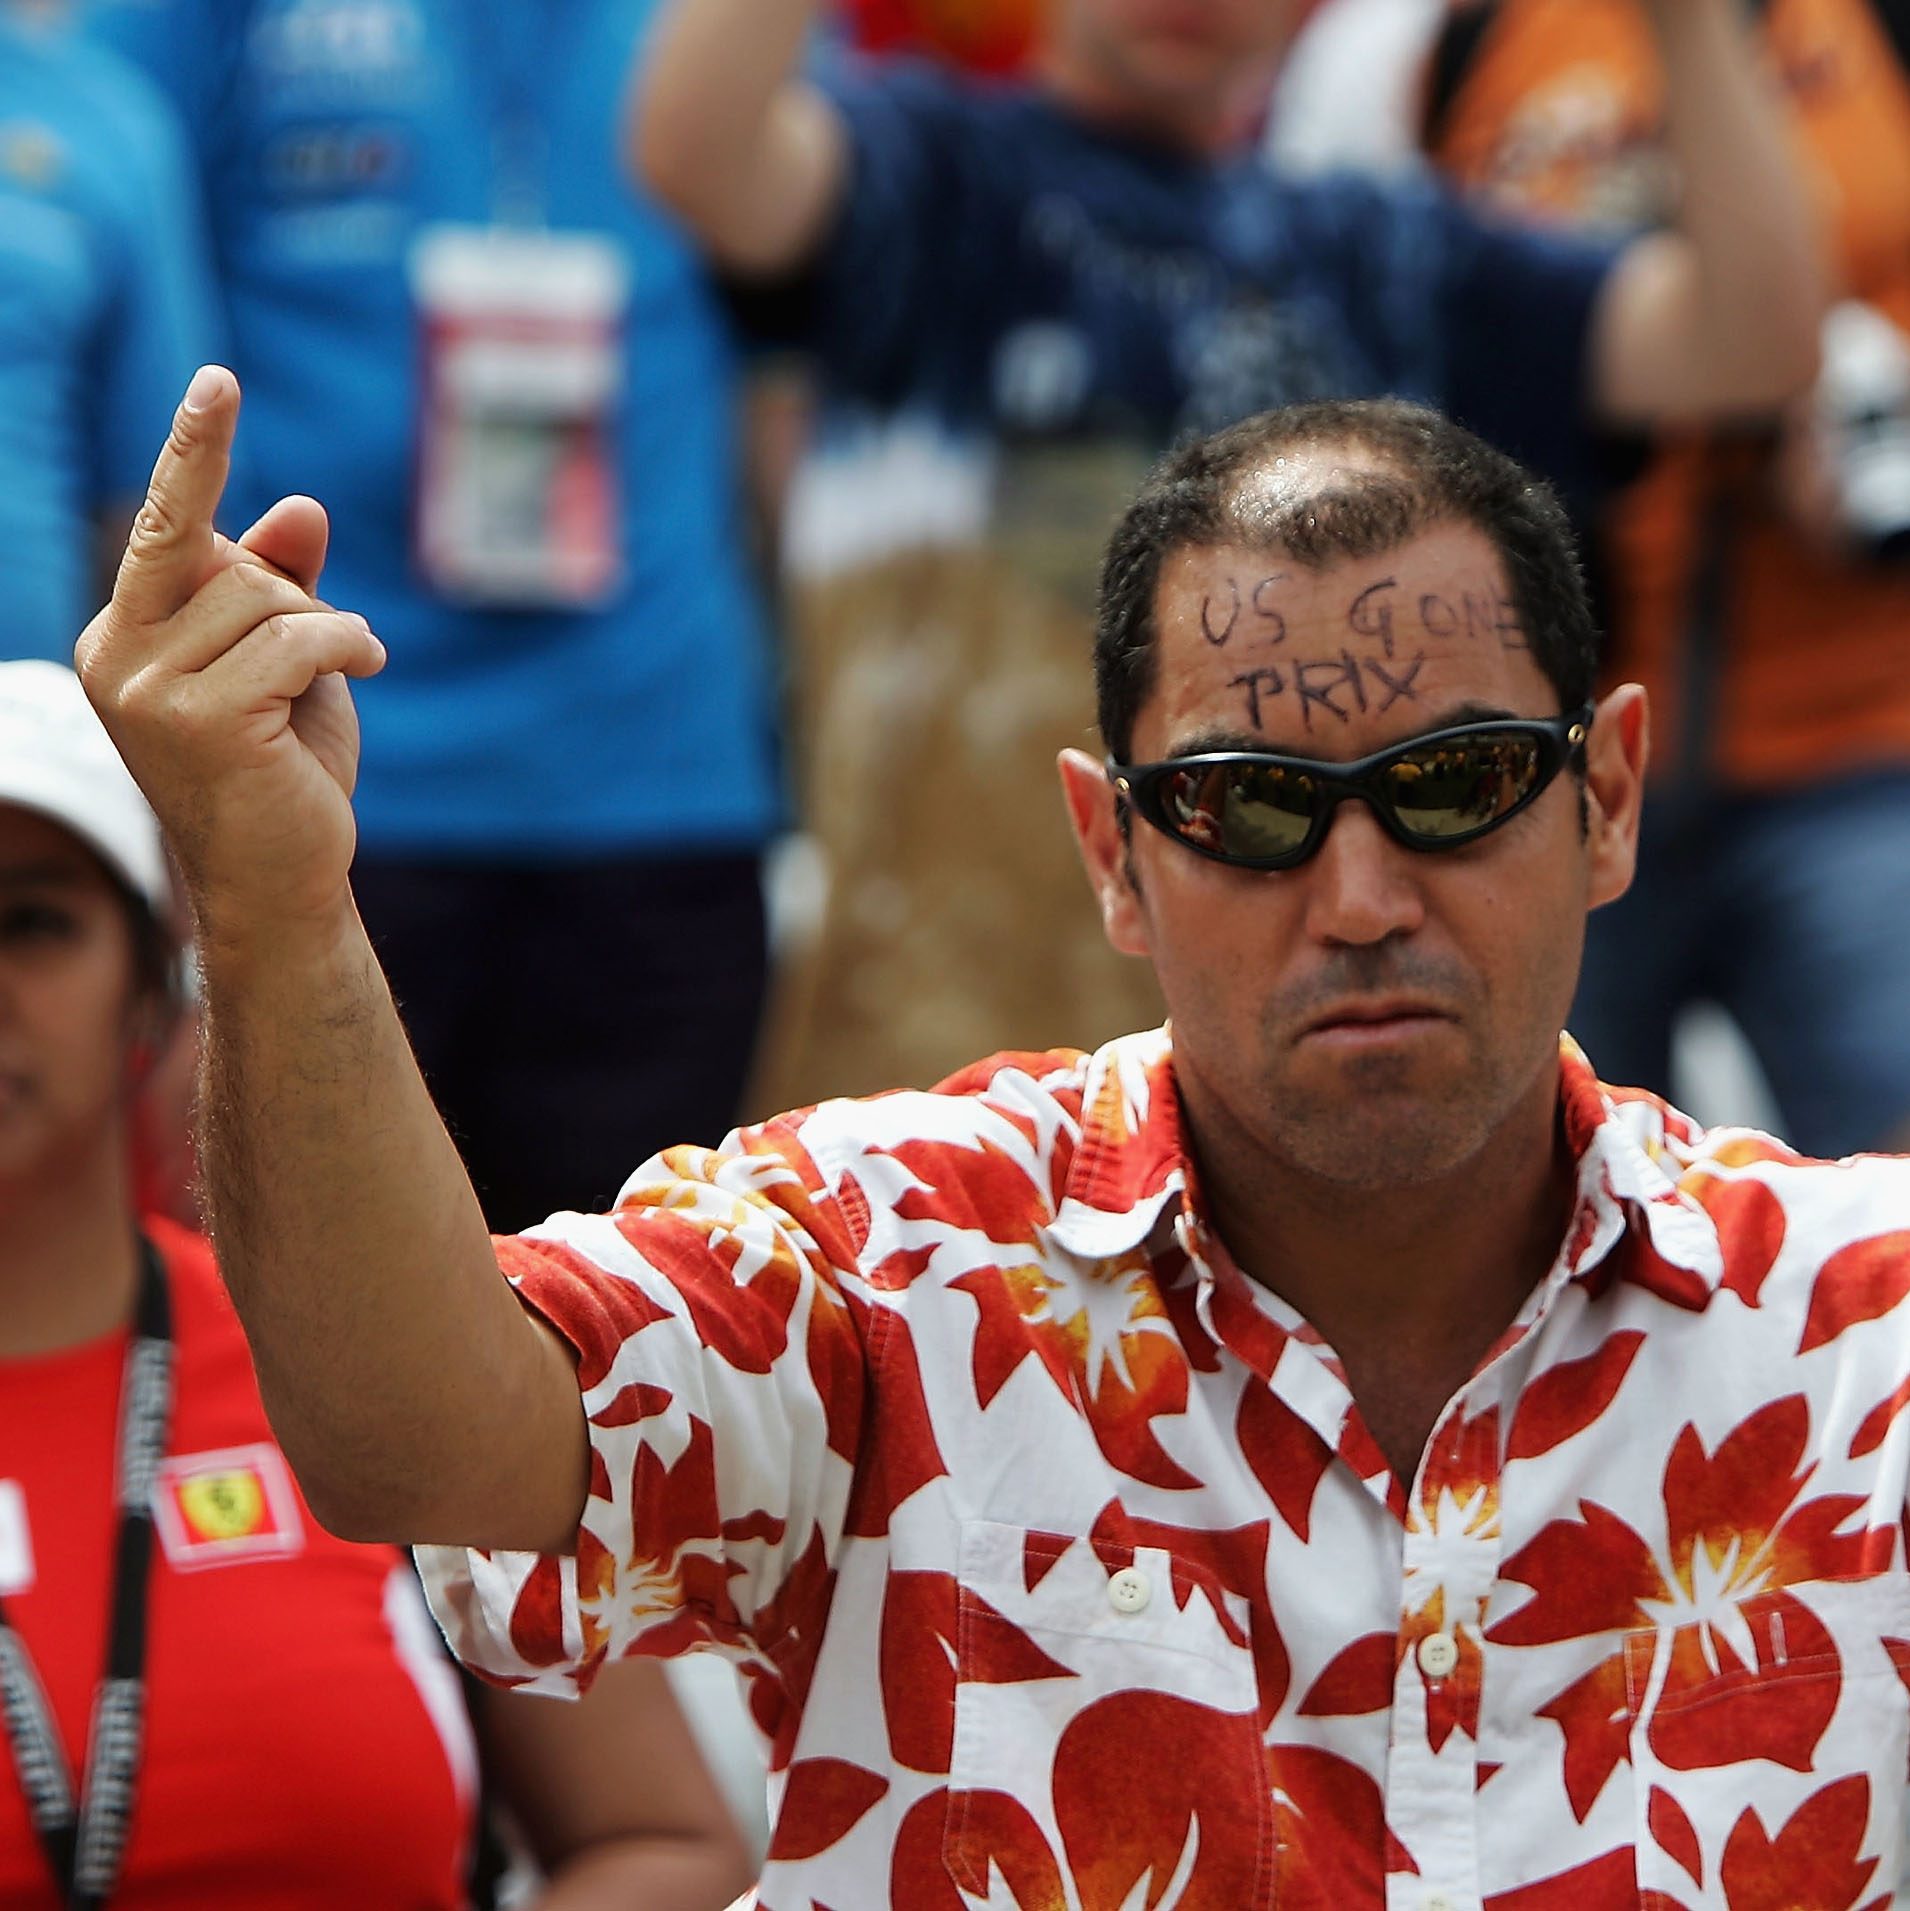 INDIANAPOLIS, IN - JUNE 19:  American Formula One fan puts his middle fingers up and writes " US Gone Prix " on his head after all the teams with Michelin tyres retired after the warm up lap during the United States F1 Grand Prix at the Indianapolis Motor Speedway on June 19, 2005 in Indianapolis, Indiana.  (Photo by Christopher Lee/Getty Images)